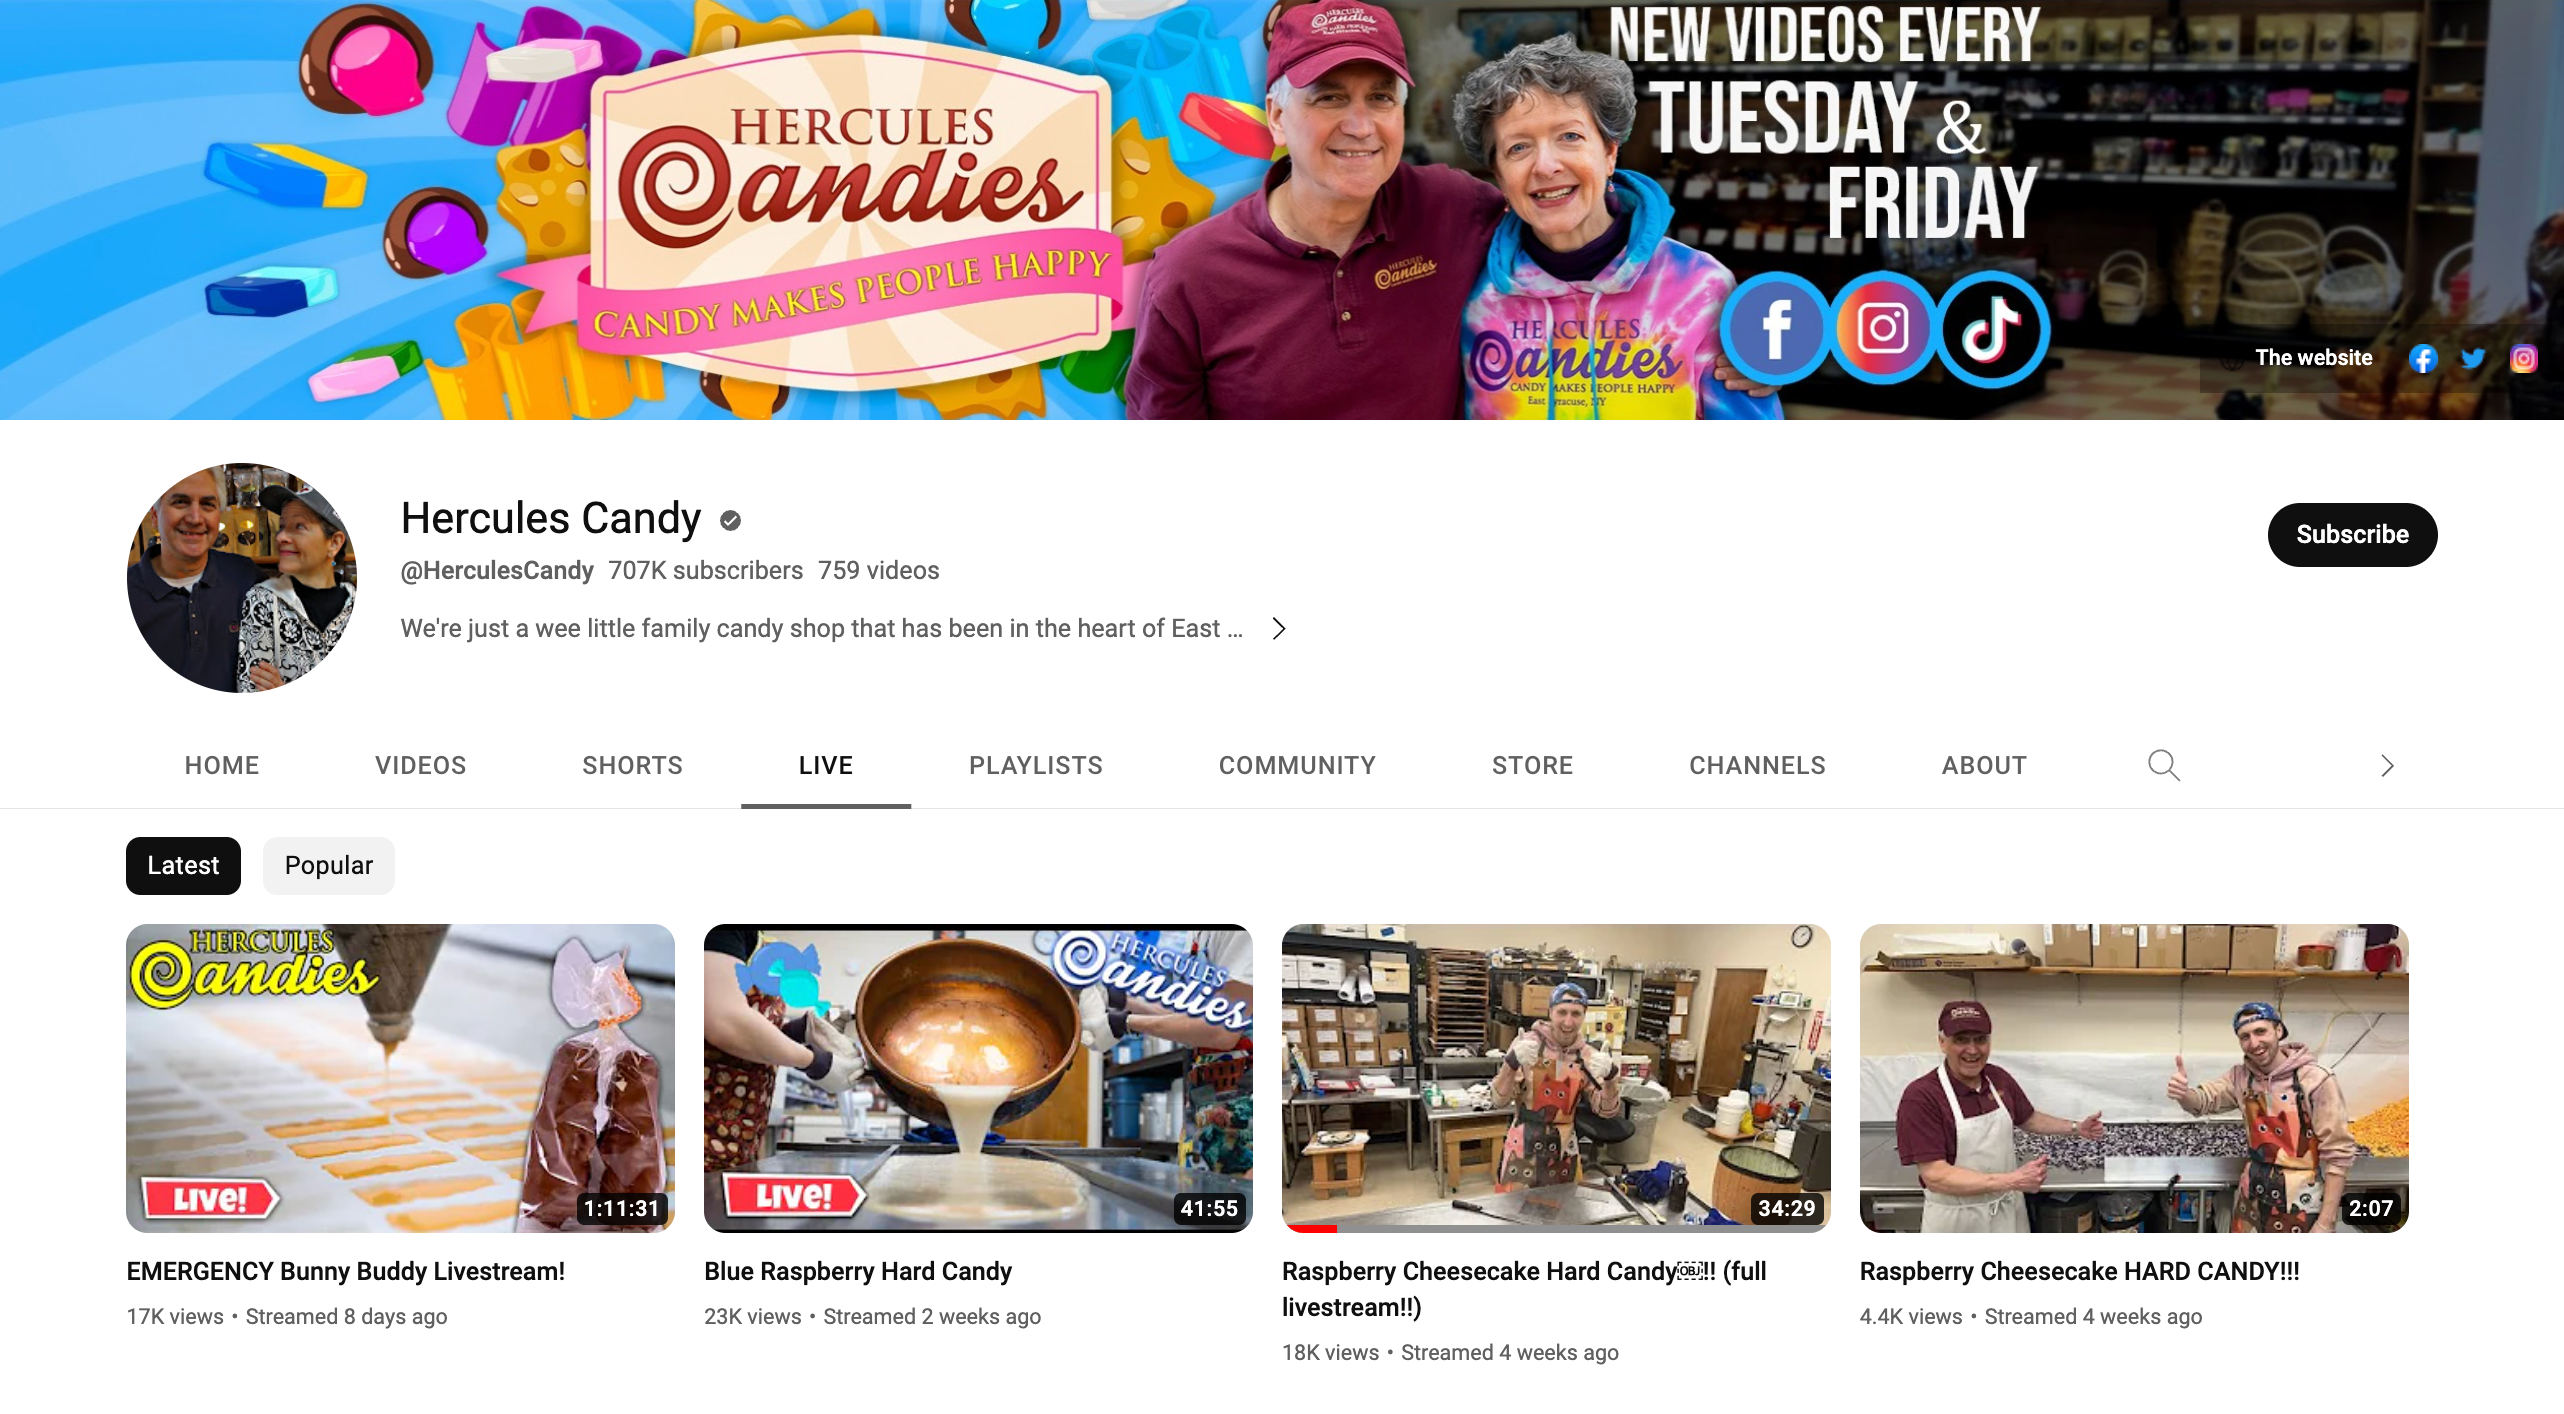 Screen grab of Hercules Candies' YouTube channel